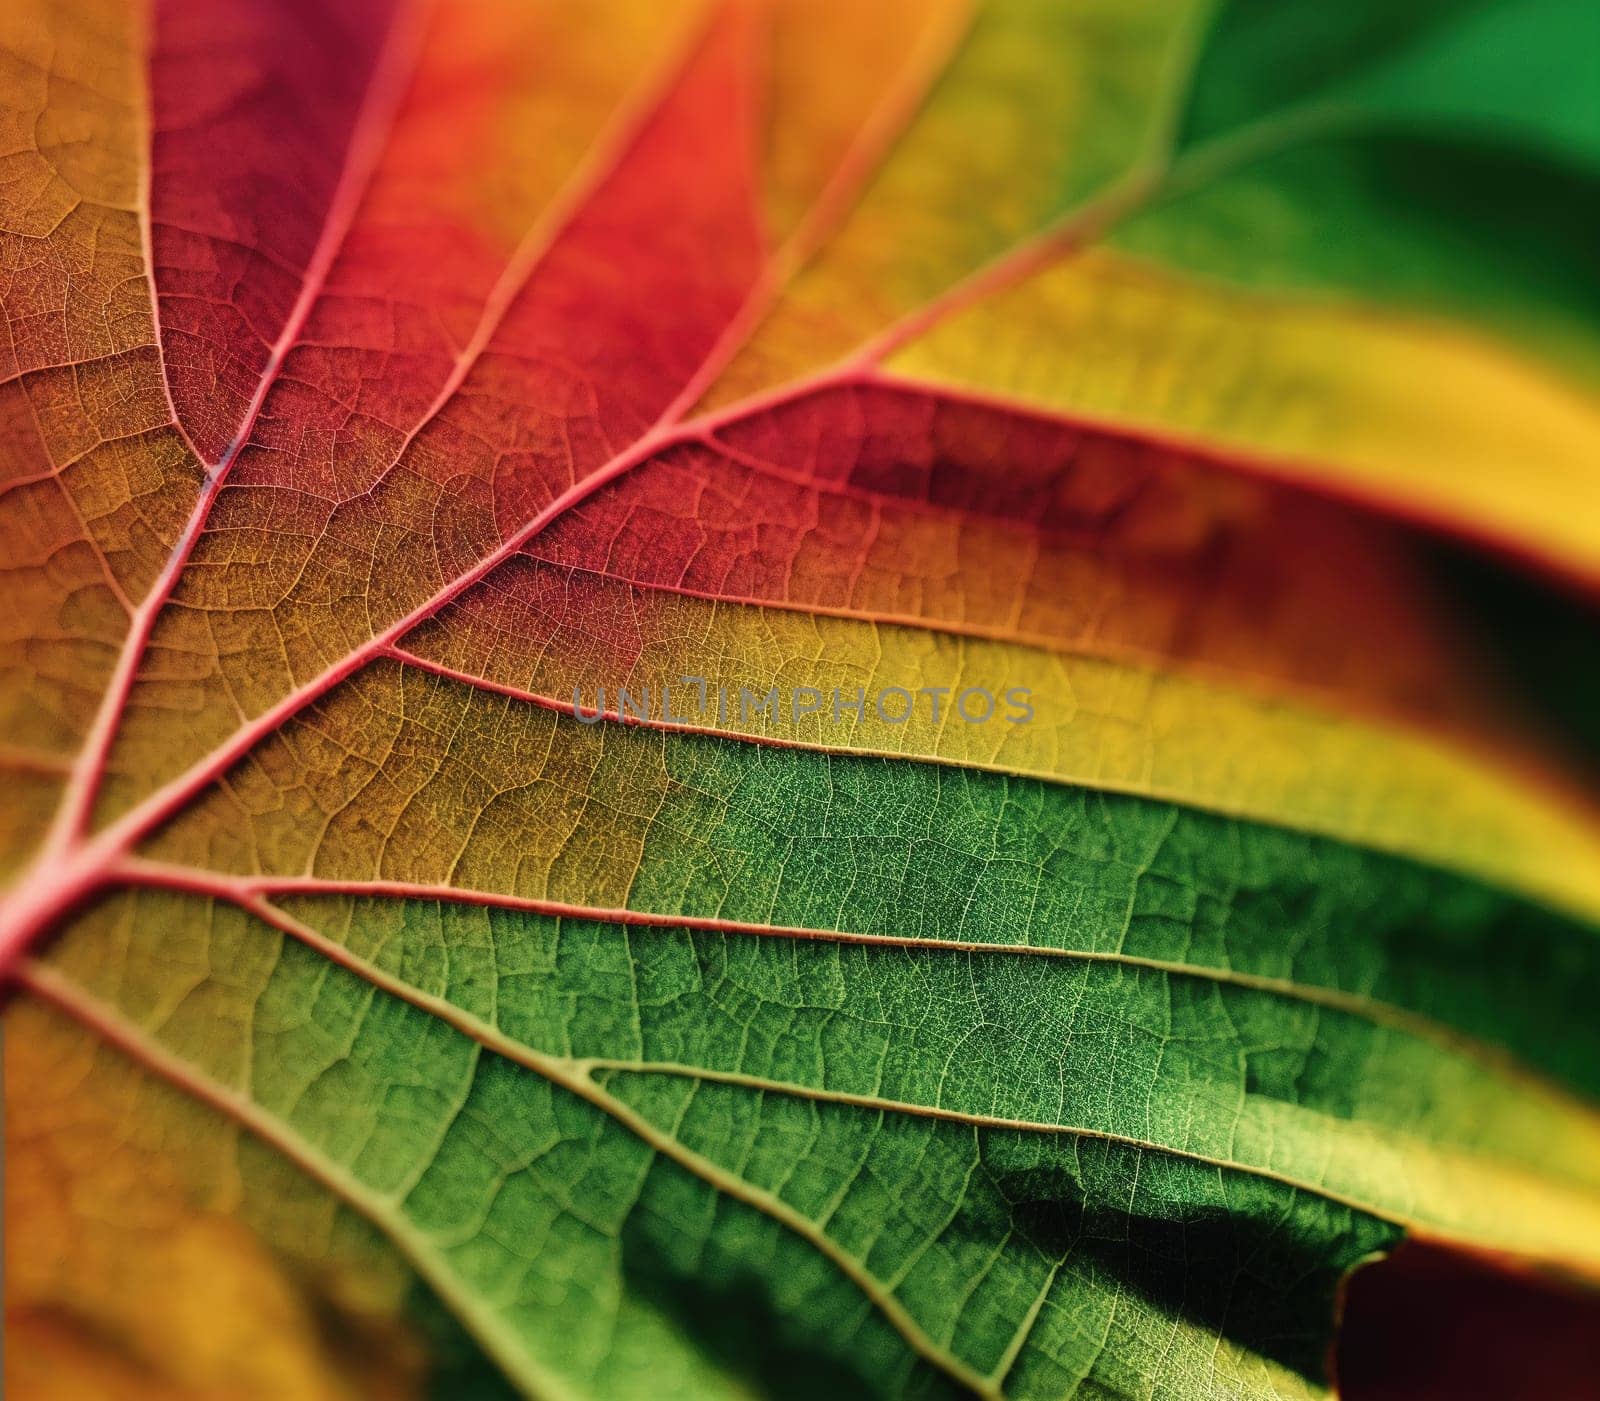 The image is a close-up of a leaf with vibrant colors and textures.